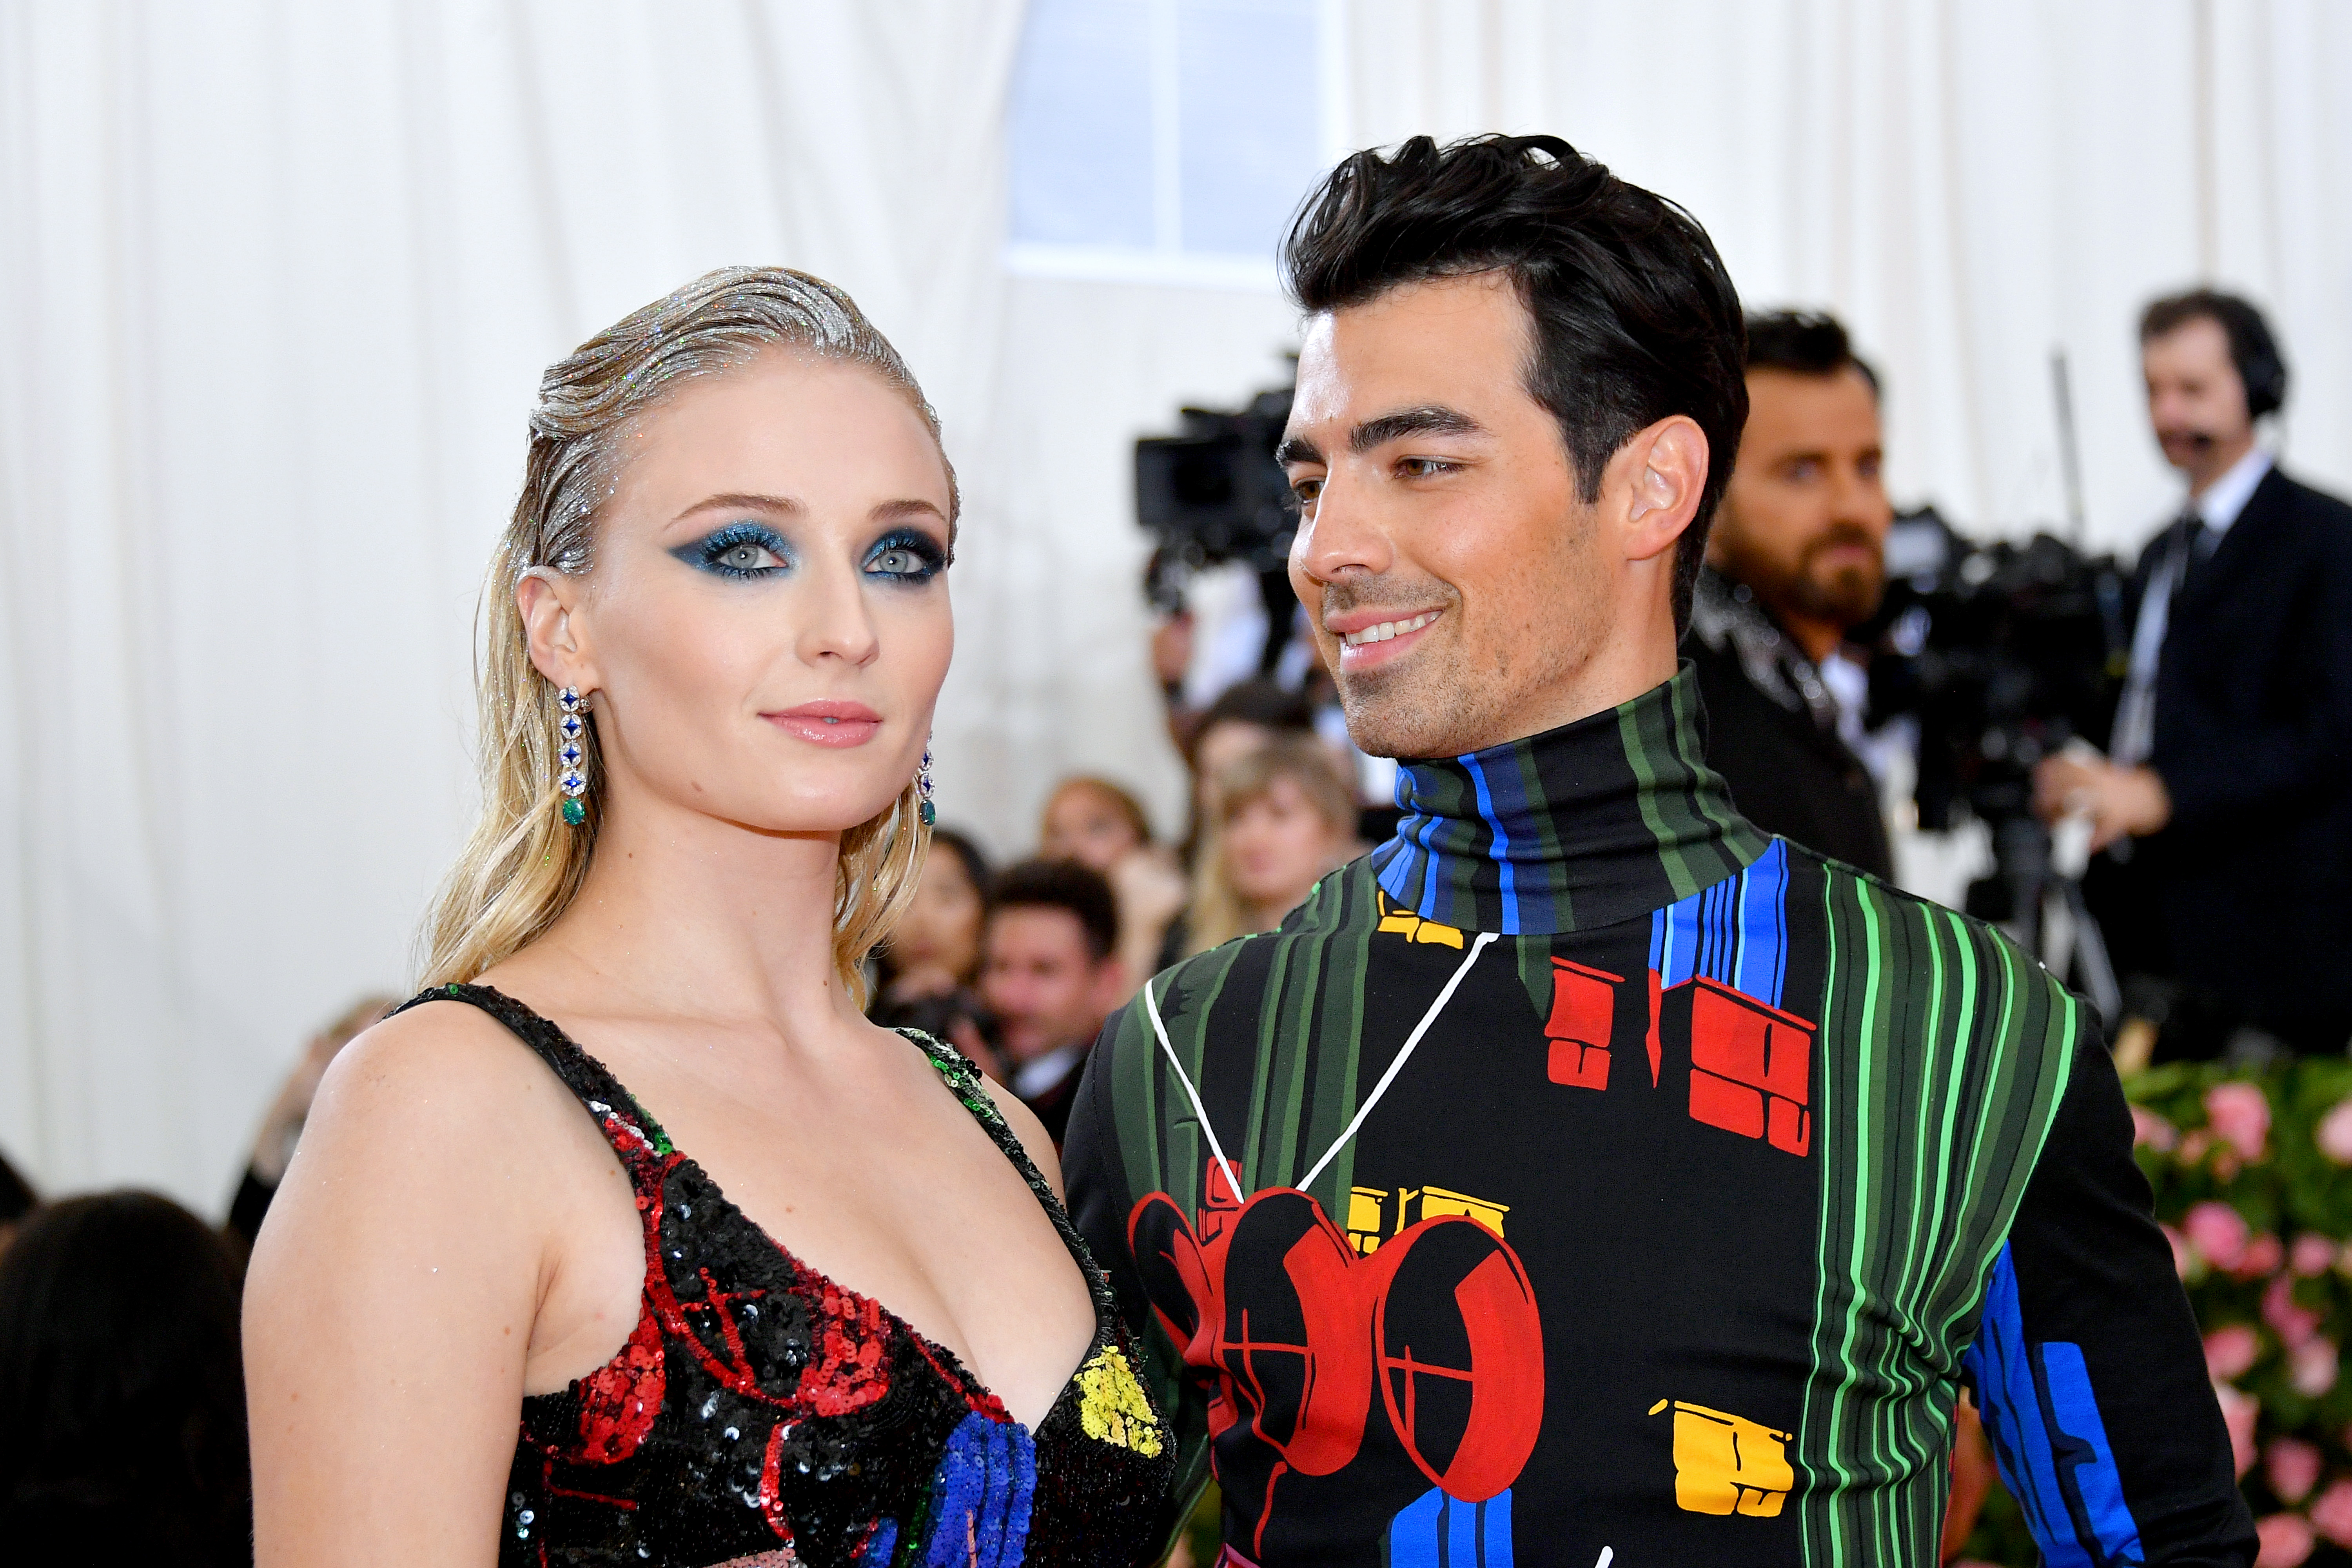 Sophie Turner and Joe Jonas at The 2019 Met Gala Celebrating Camp: Notes on Fashion in New York City on May 6, 2019 | Source: Getty Images